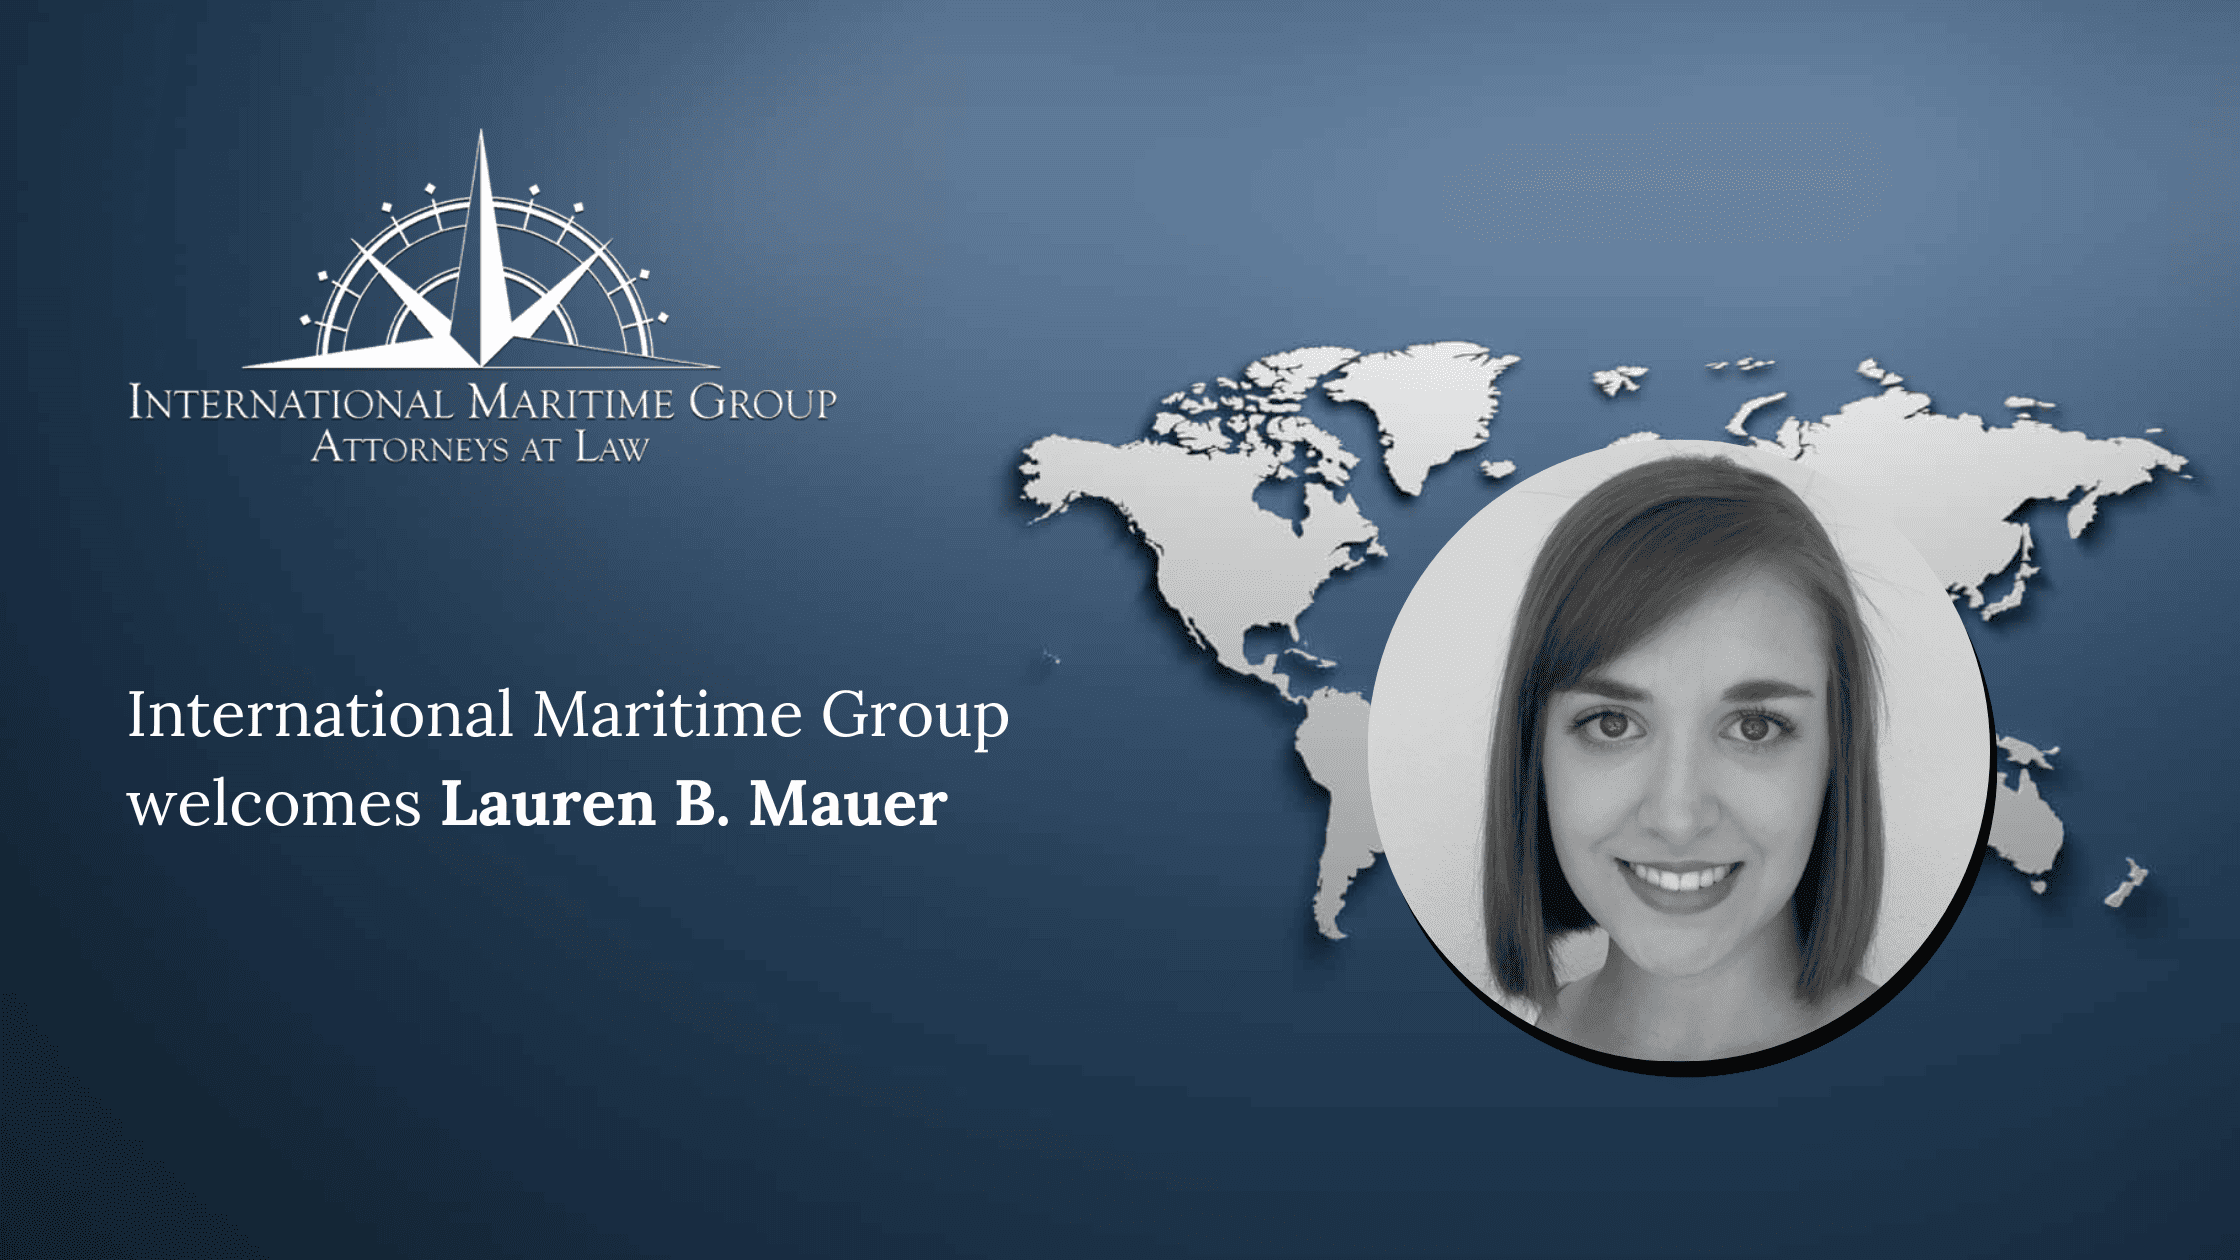 IMG welcomes Lauren B. Mauer to the firm